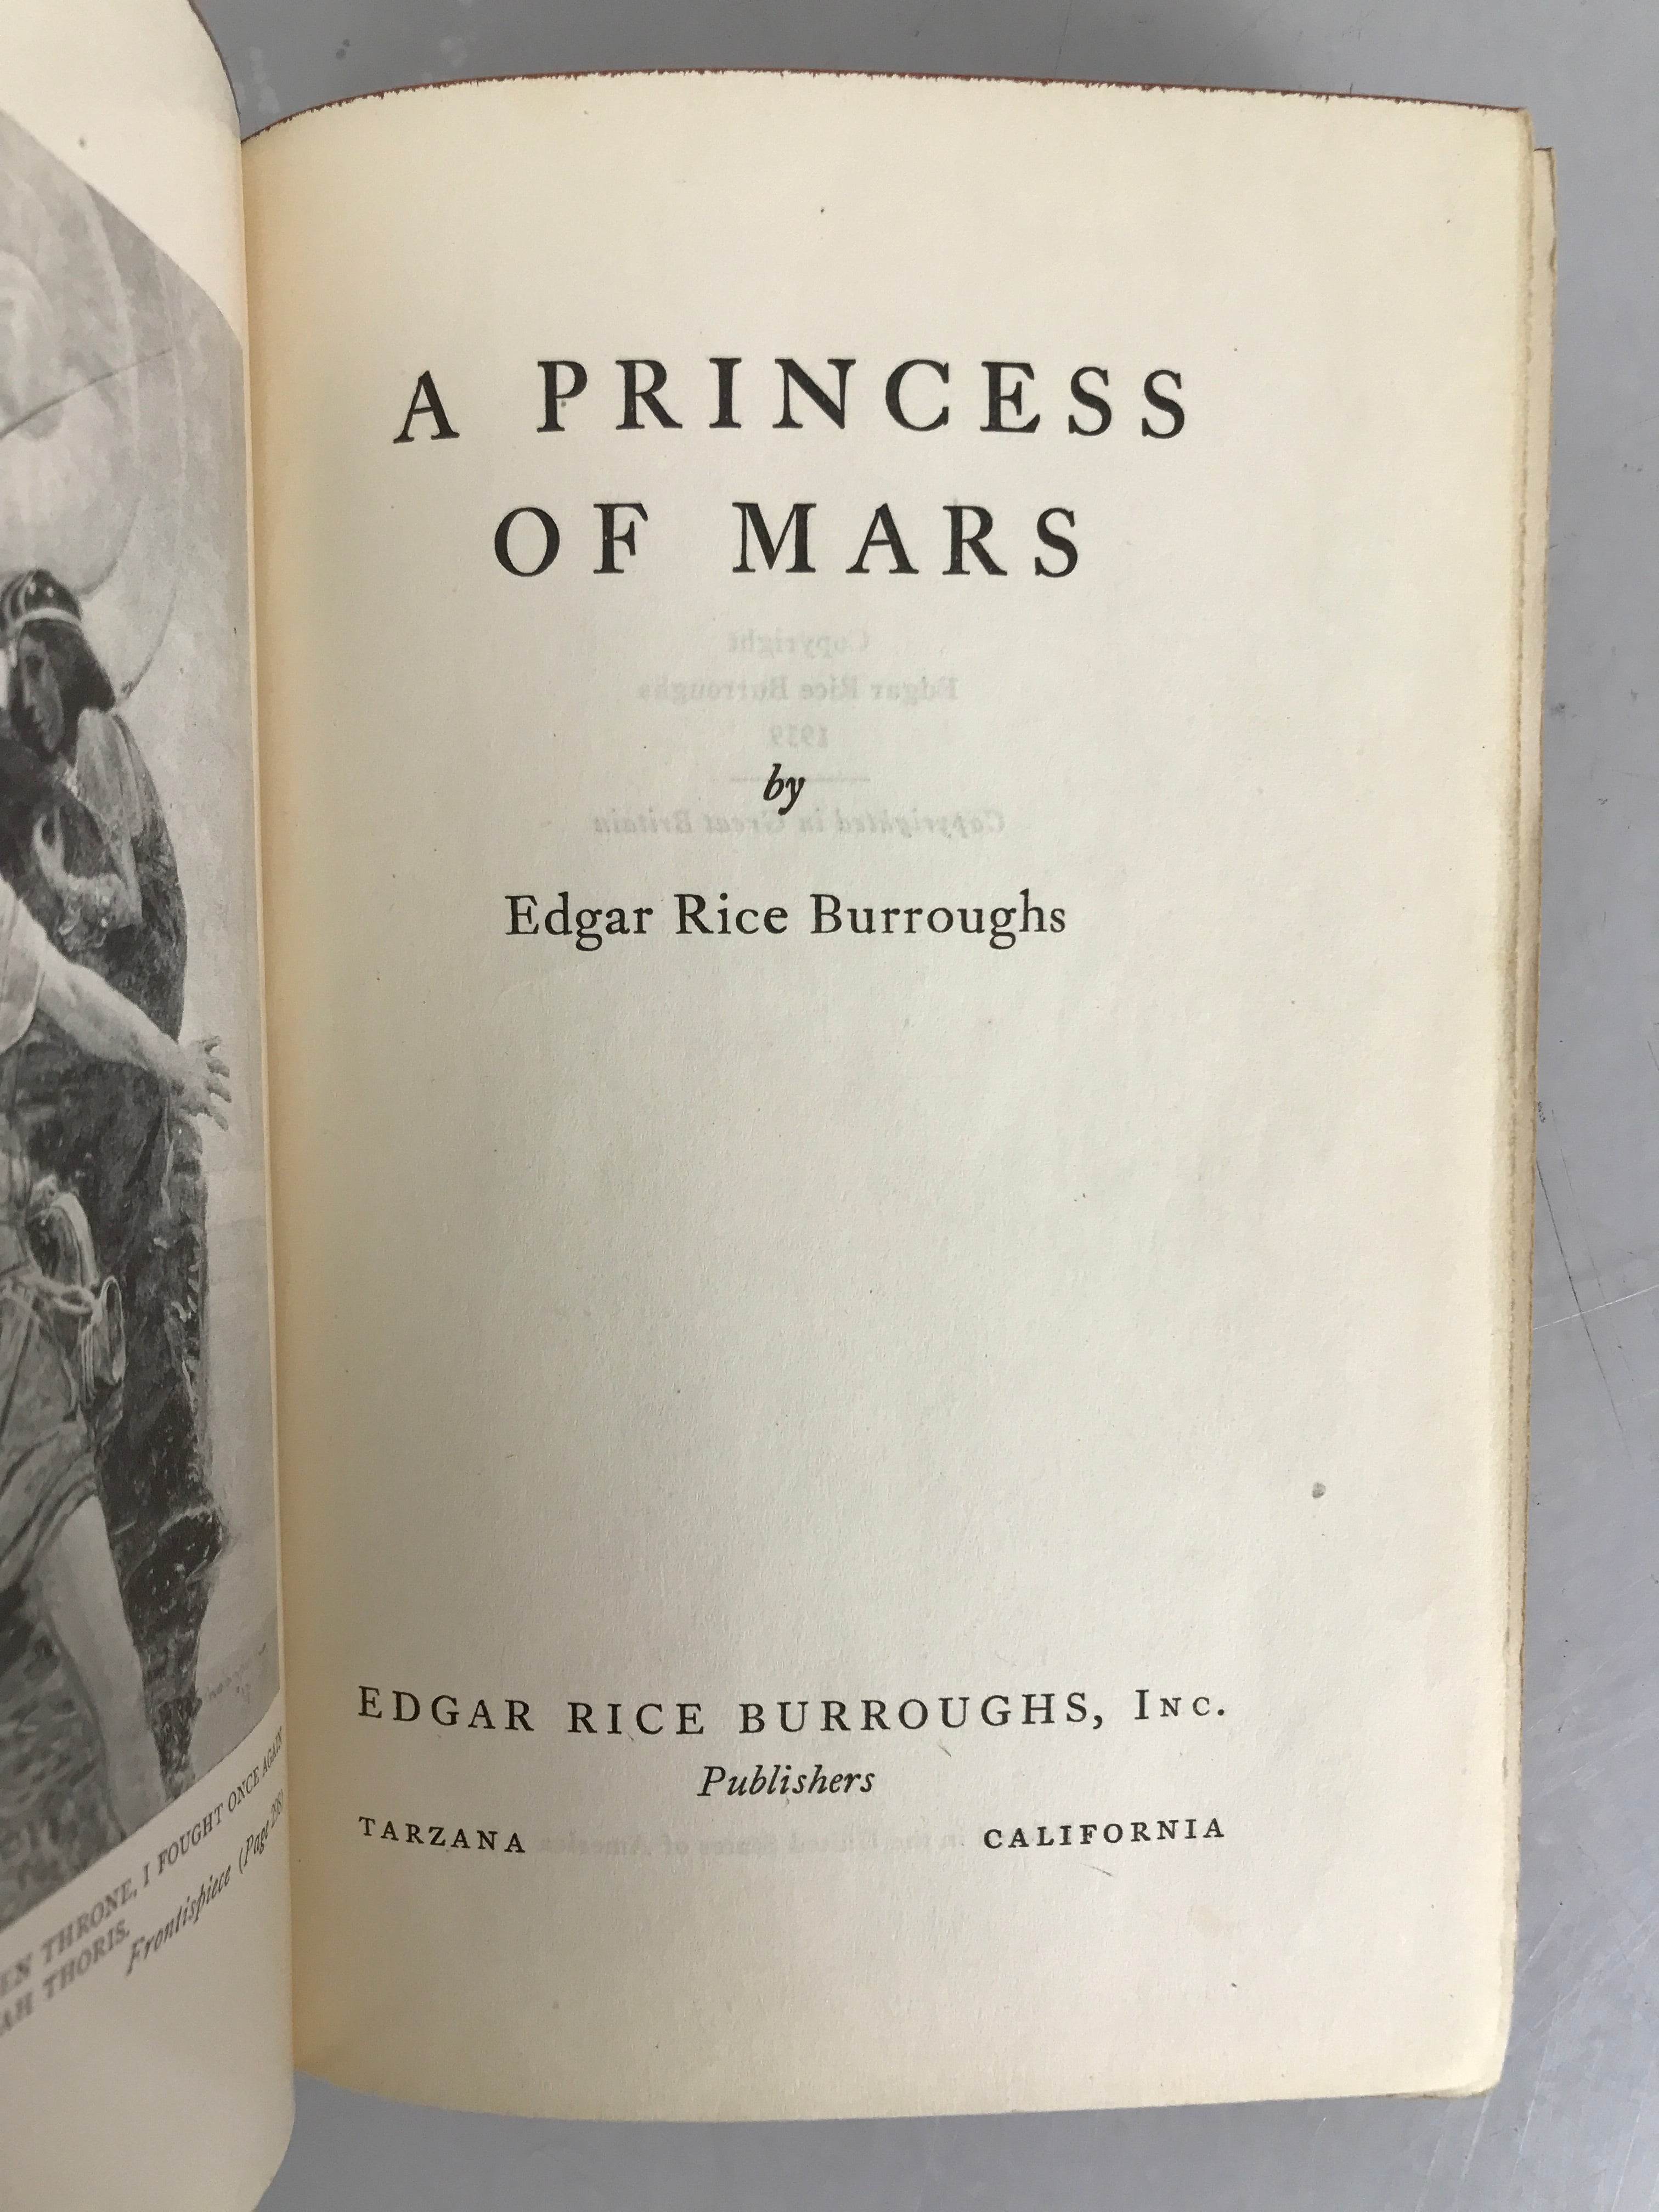 Lot of 4 Edgar Rice Burroughs Mars Series Books: The Gods of Mars, The Chessmen of Mars, A Princess of Mars, and The Warlord of Mars 1918-1947 HC